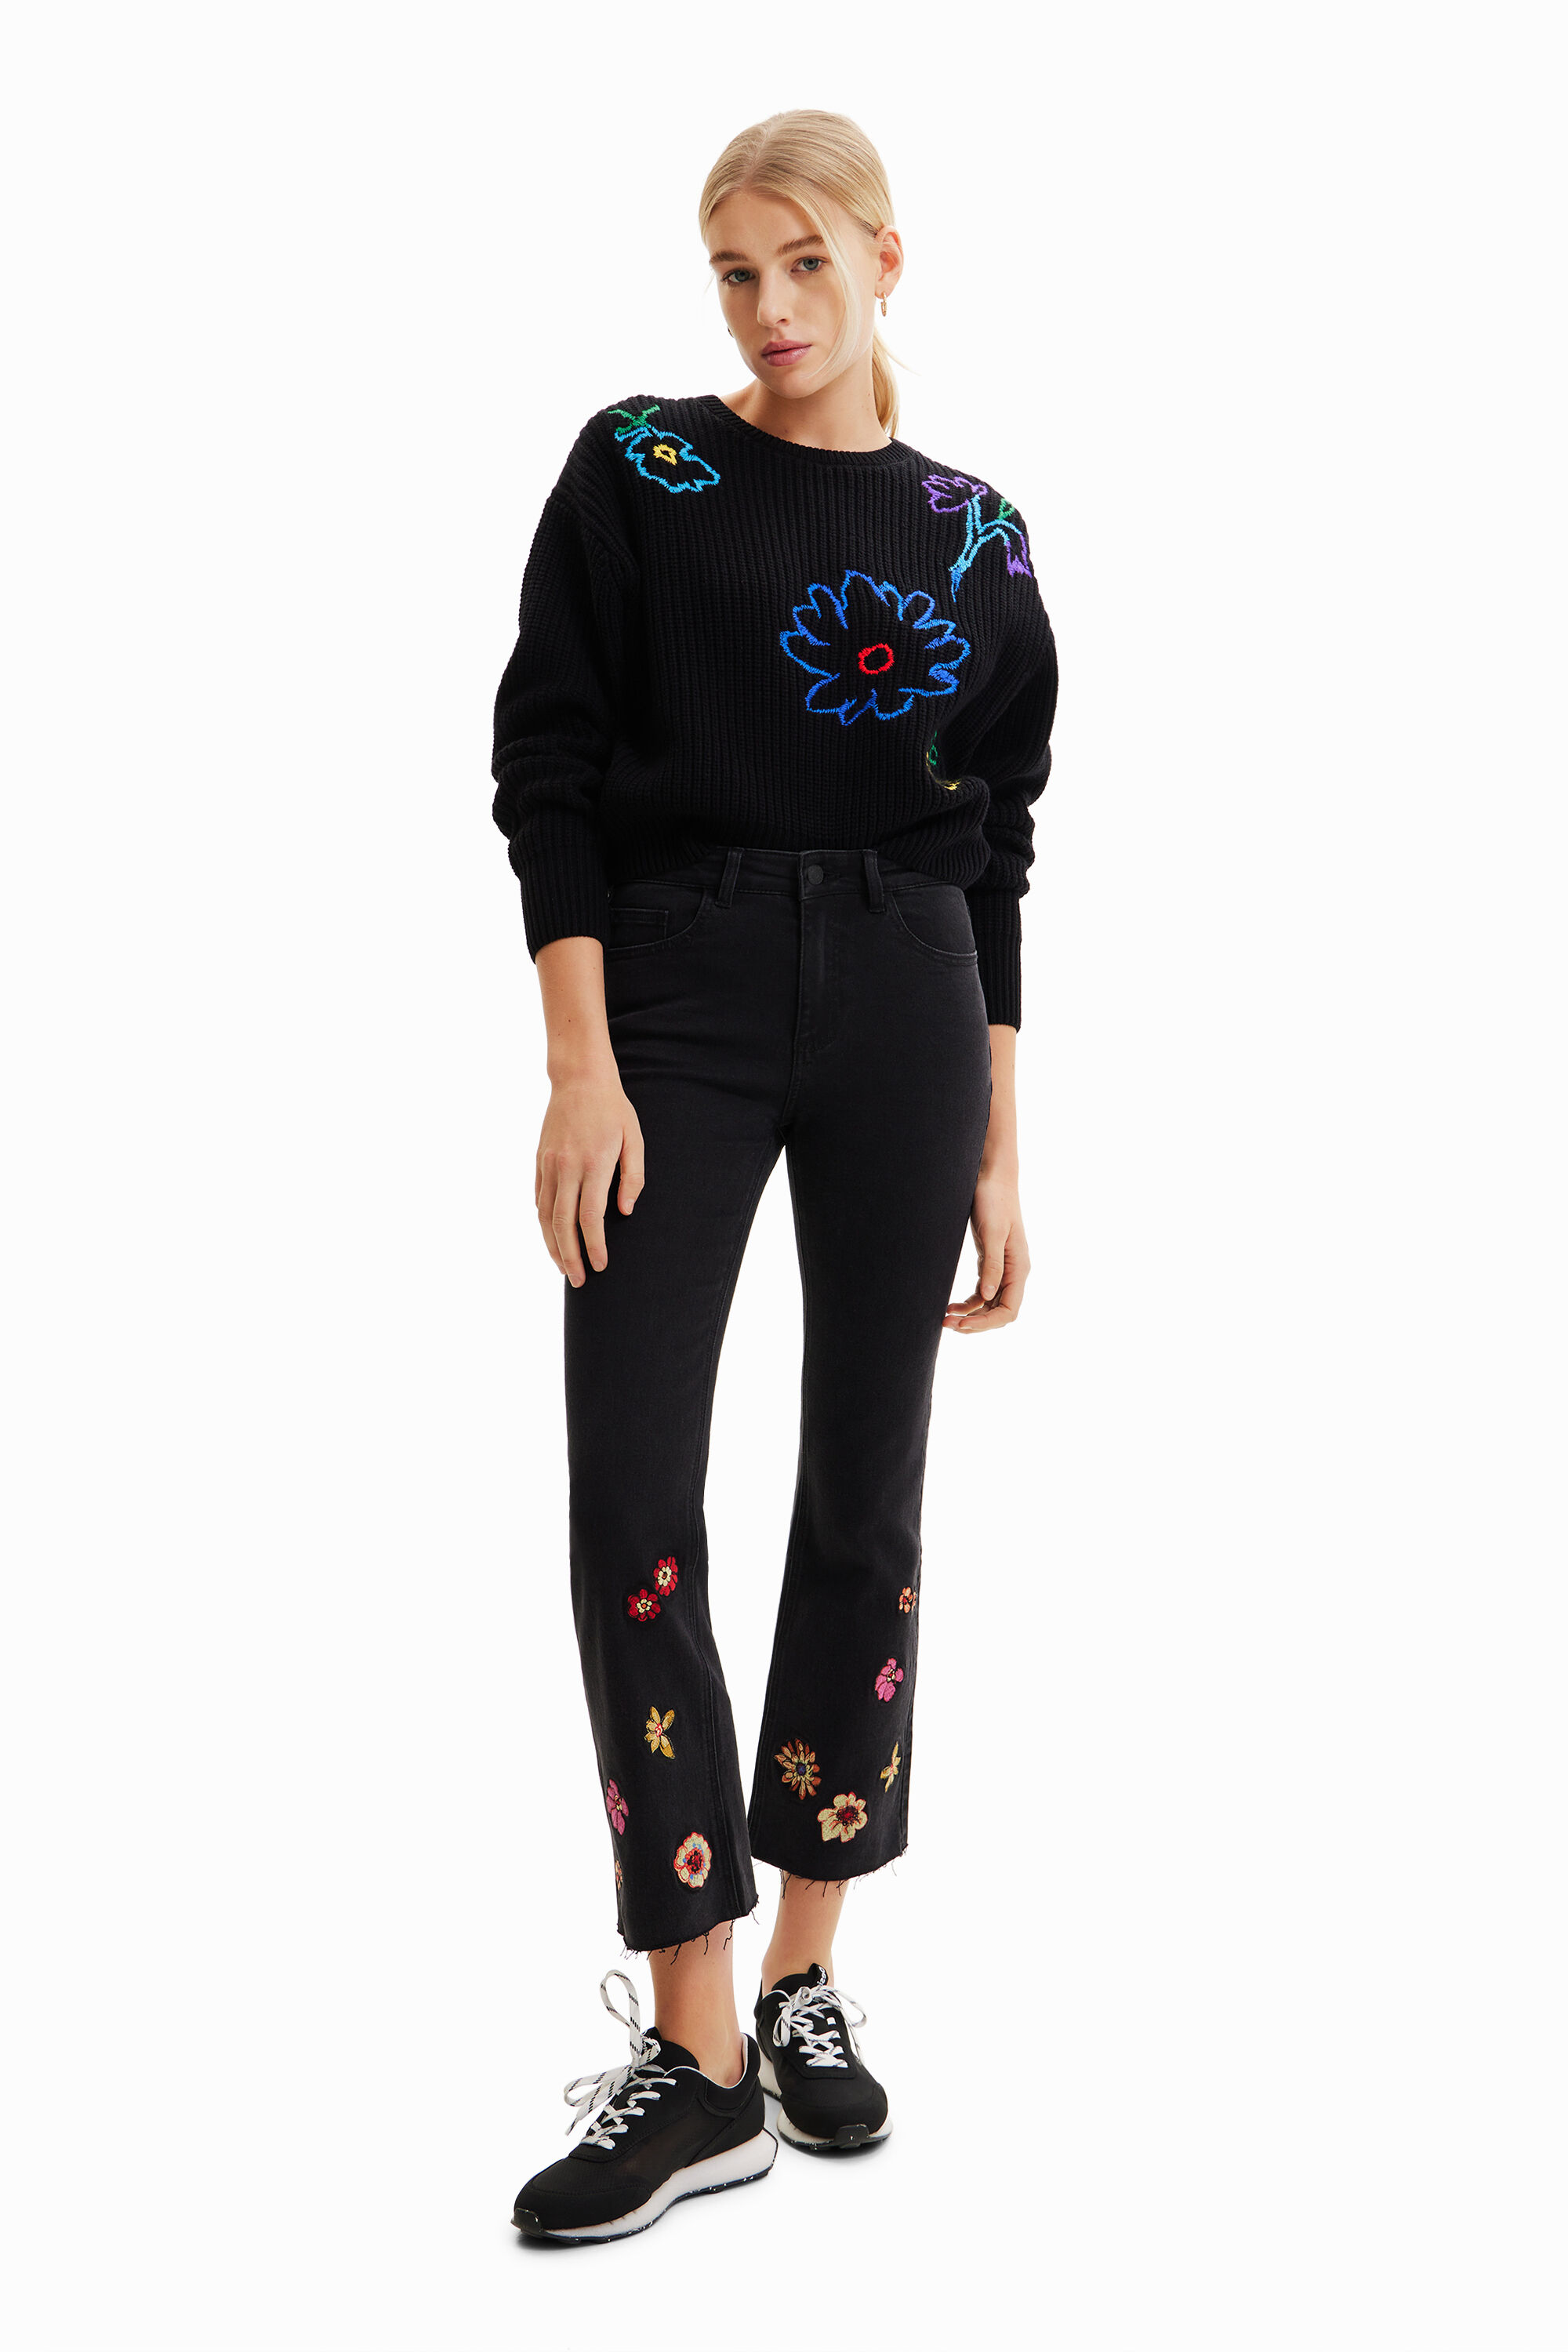 Desigual Floral embroidery flare cropped jeans